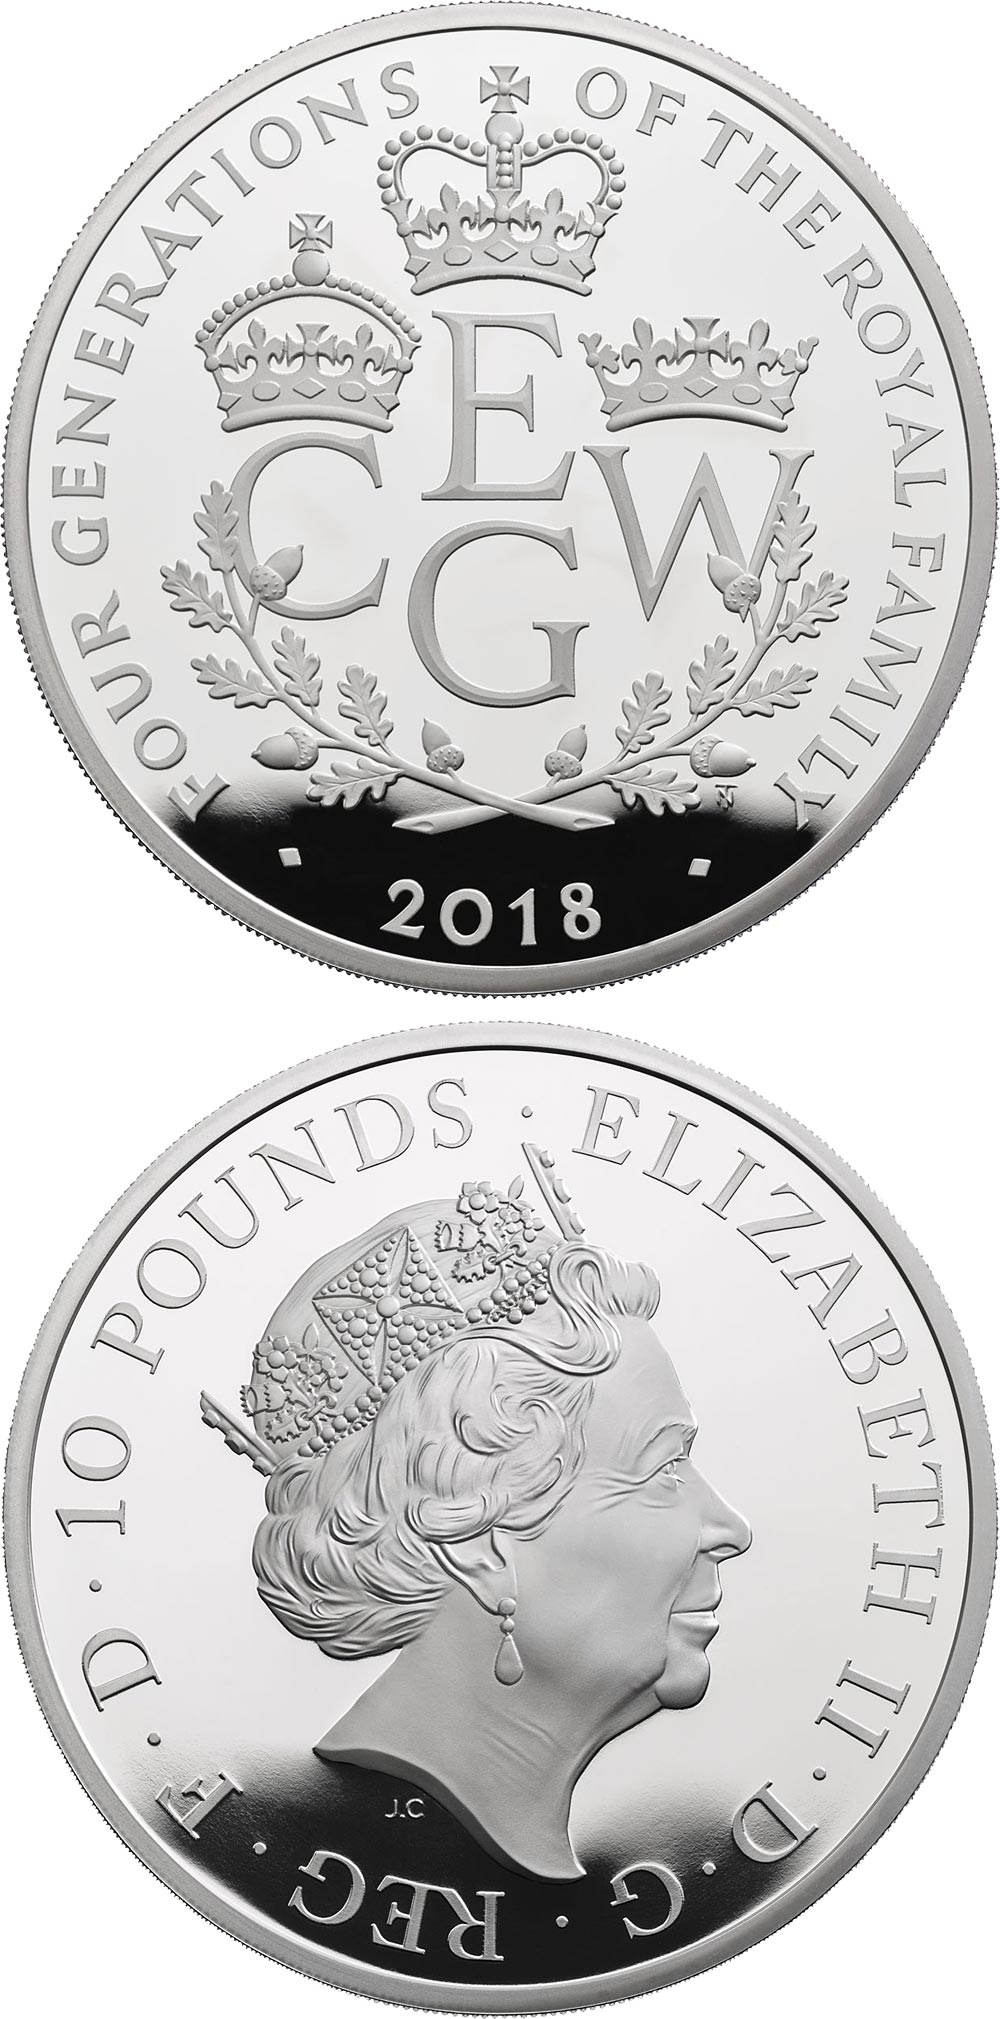 Image of 10 pounds coin - The Four Generations of Royalty | United Kingdom 2018.  The Silver coin is of Proof quality.